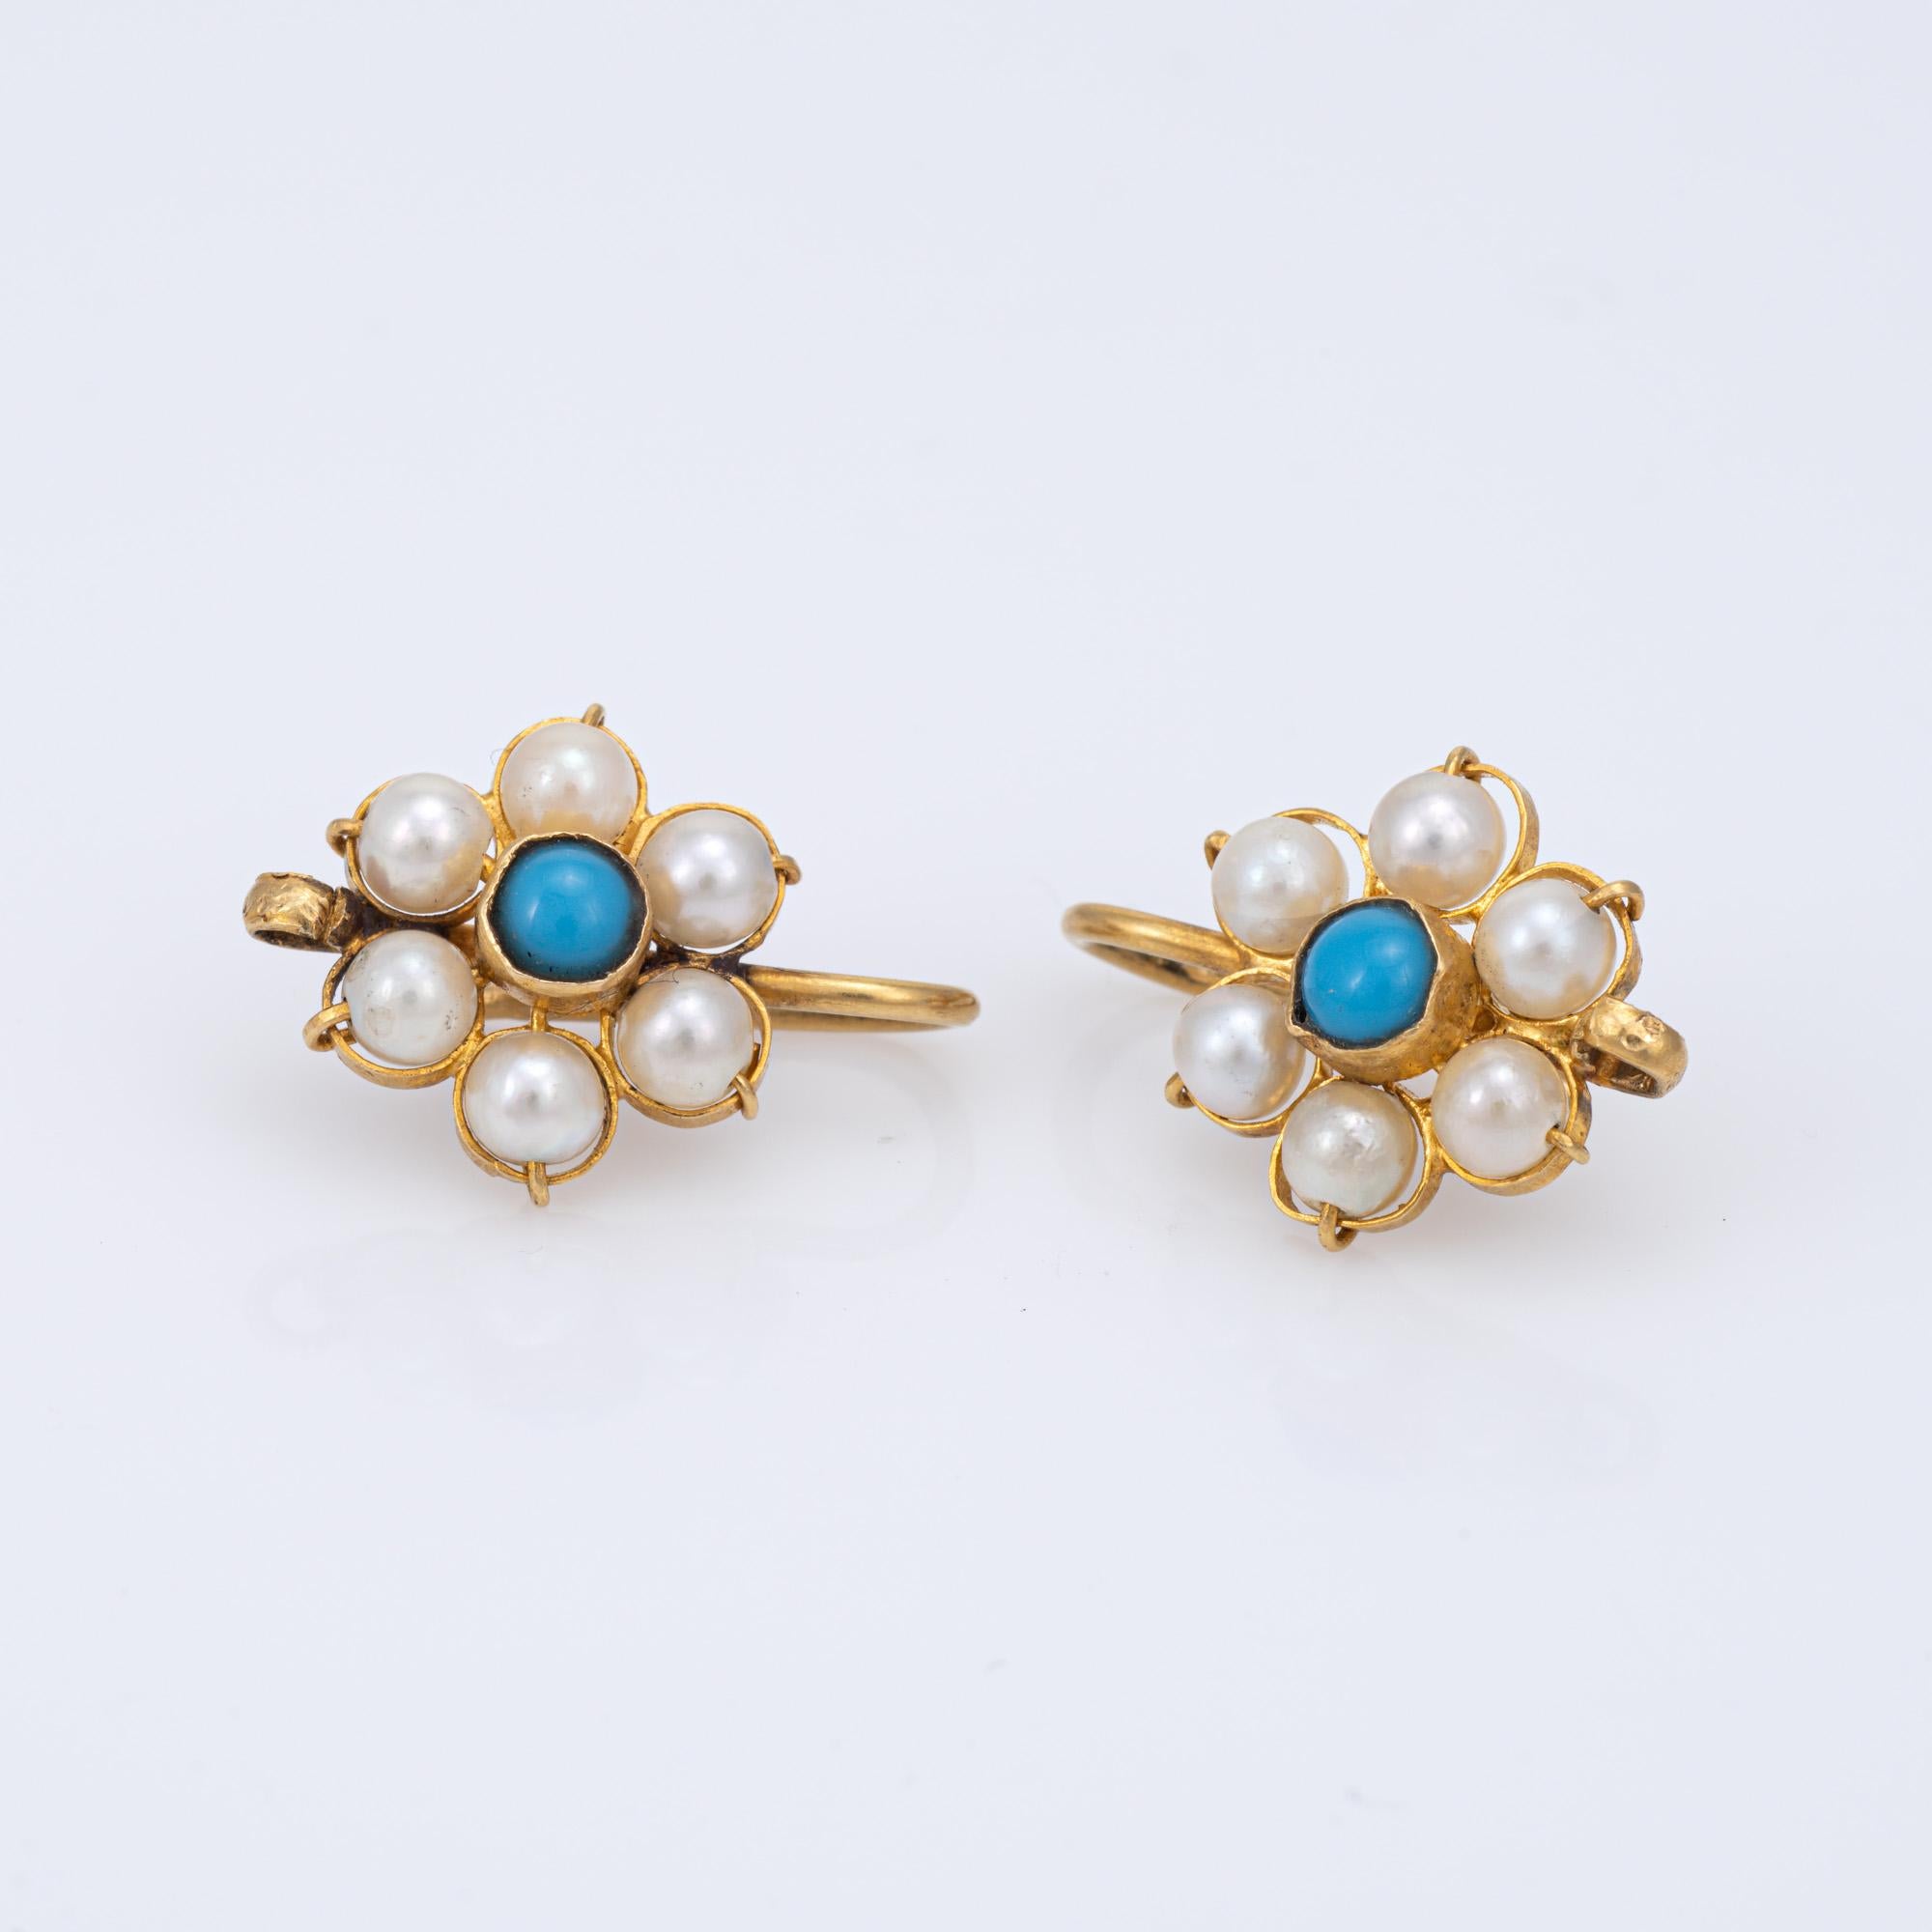 Finely detailed pair of vintage cultured pearl & turquoise flower earrings crafted in 18k yellow gold. 

Cultured pearls each measure 4mm each. Turquoise measures 3.5mm. 
The sweet earrings are crafted in the form of daisy flowers with creamy